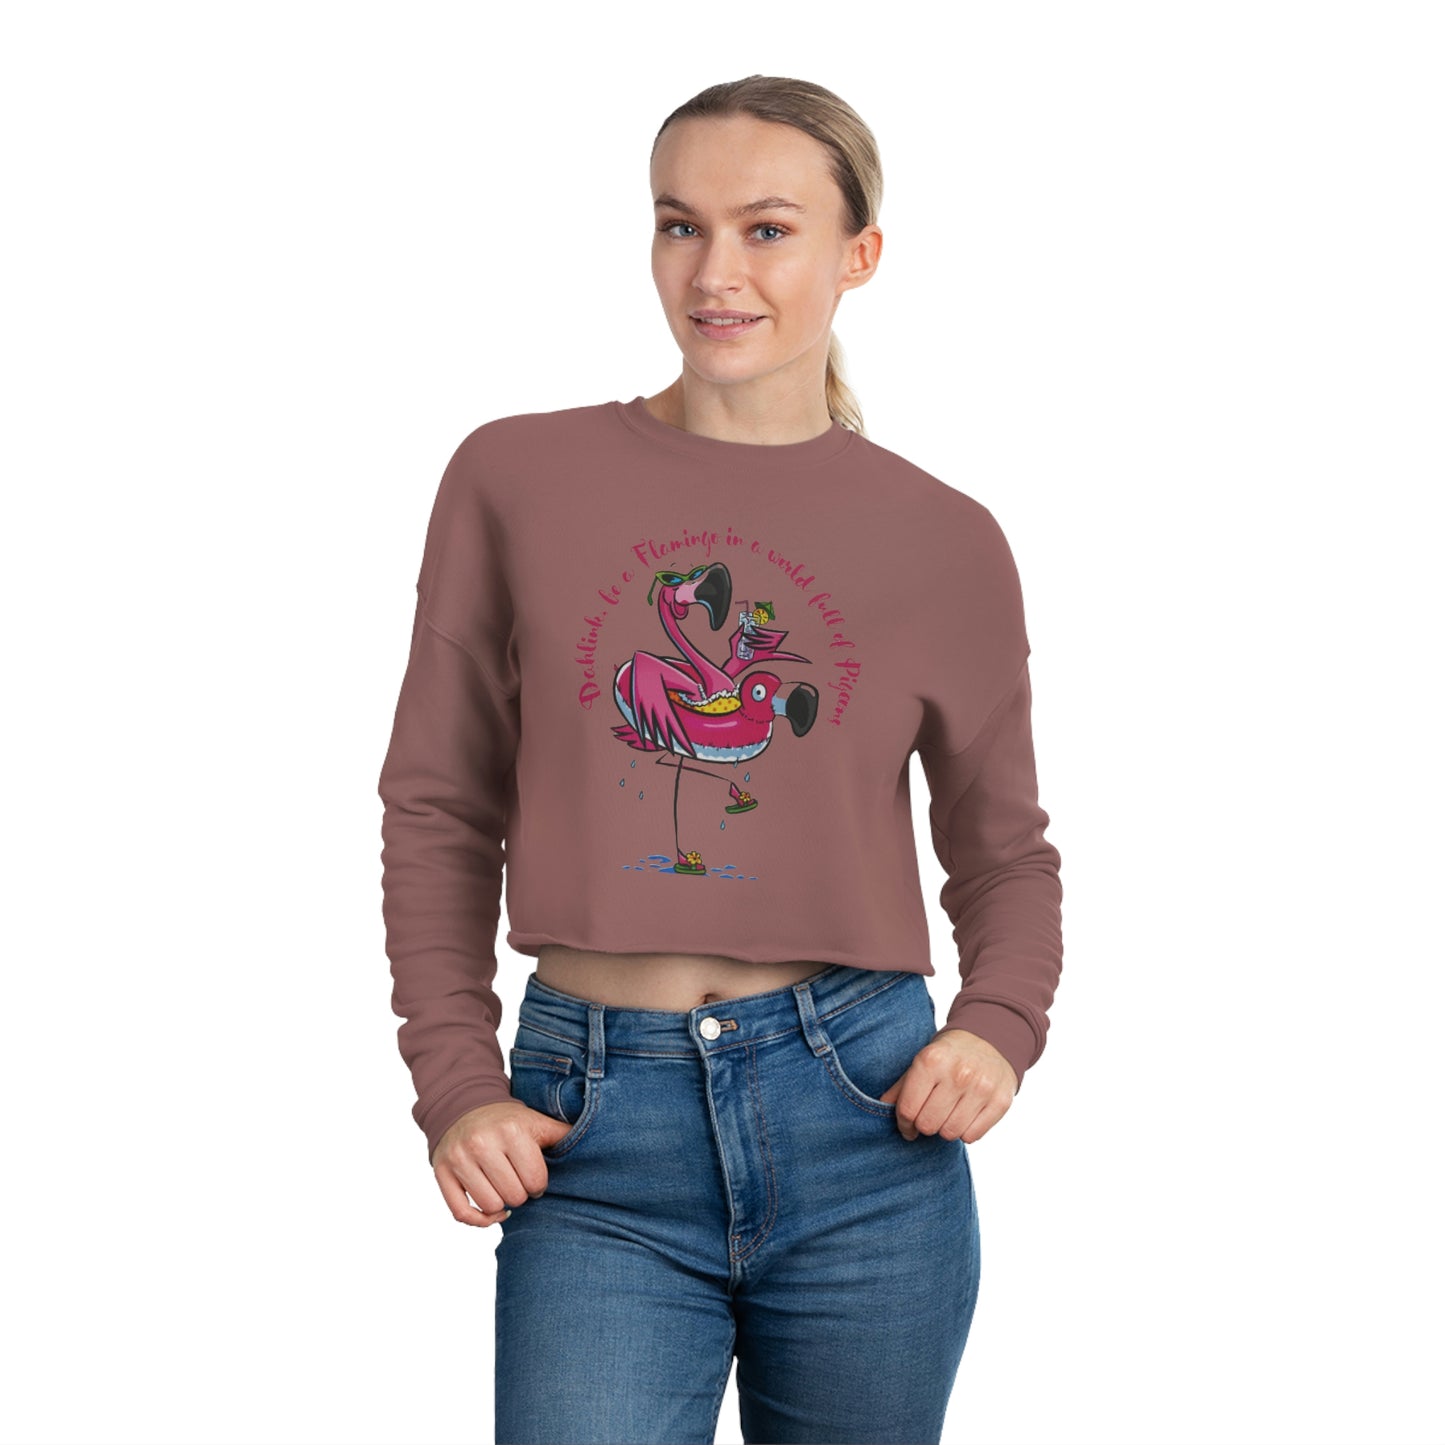 ‘Dahlink, be A flamingo in a world of pigeons’  Women's Cropped Sweatshirt